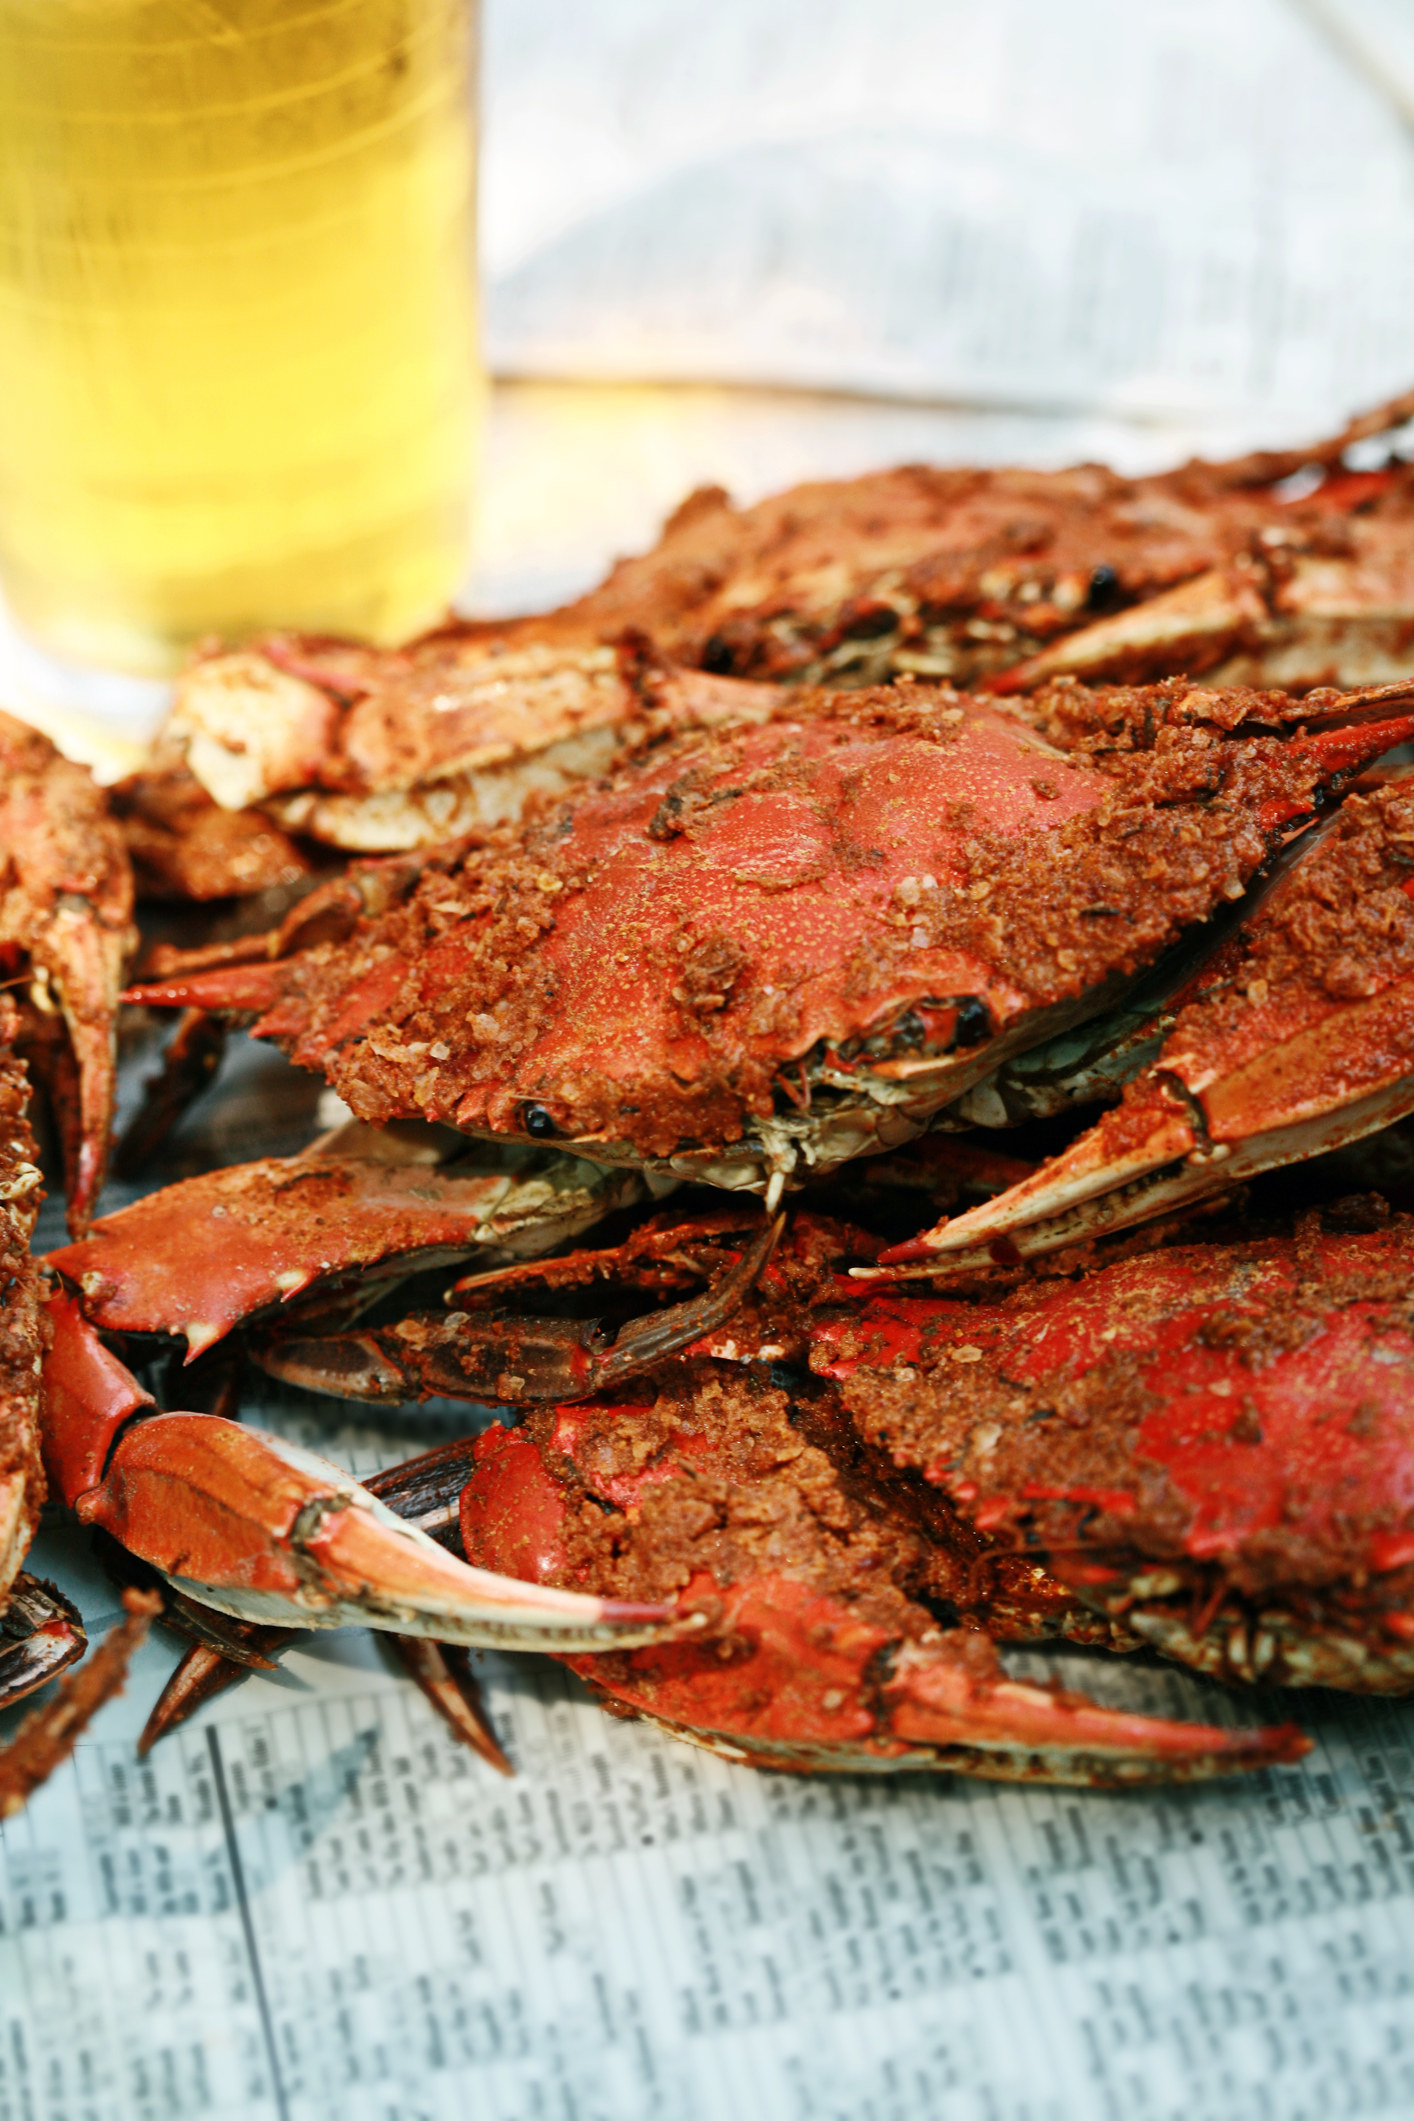 Maryland steamed crabs